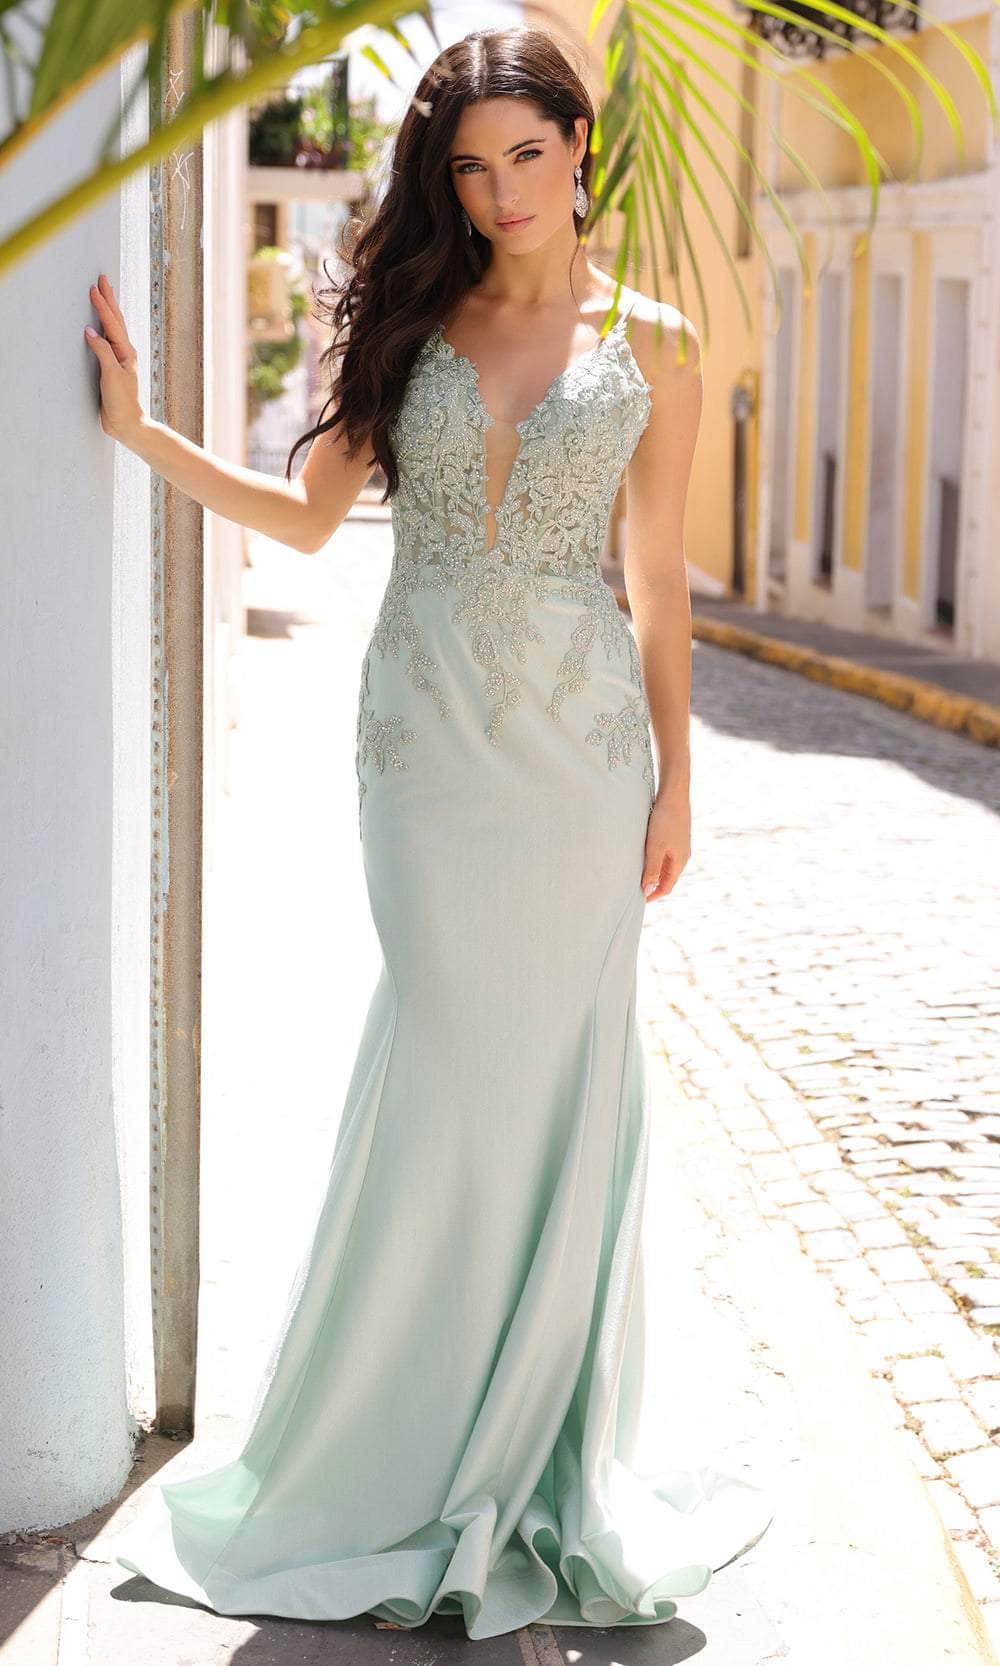 Nox Anabel G1364 - Trailing Lace Prom Dress Special Occasion Dress 0 / Sage Green